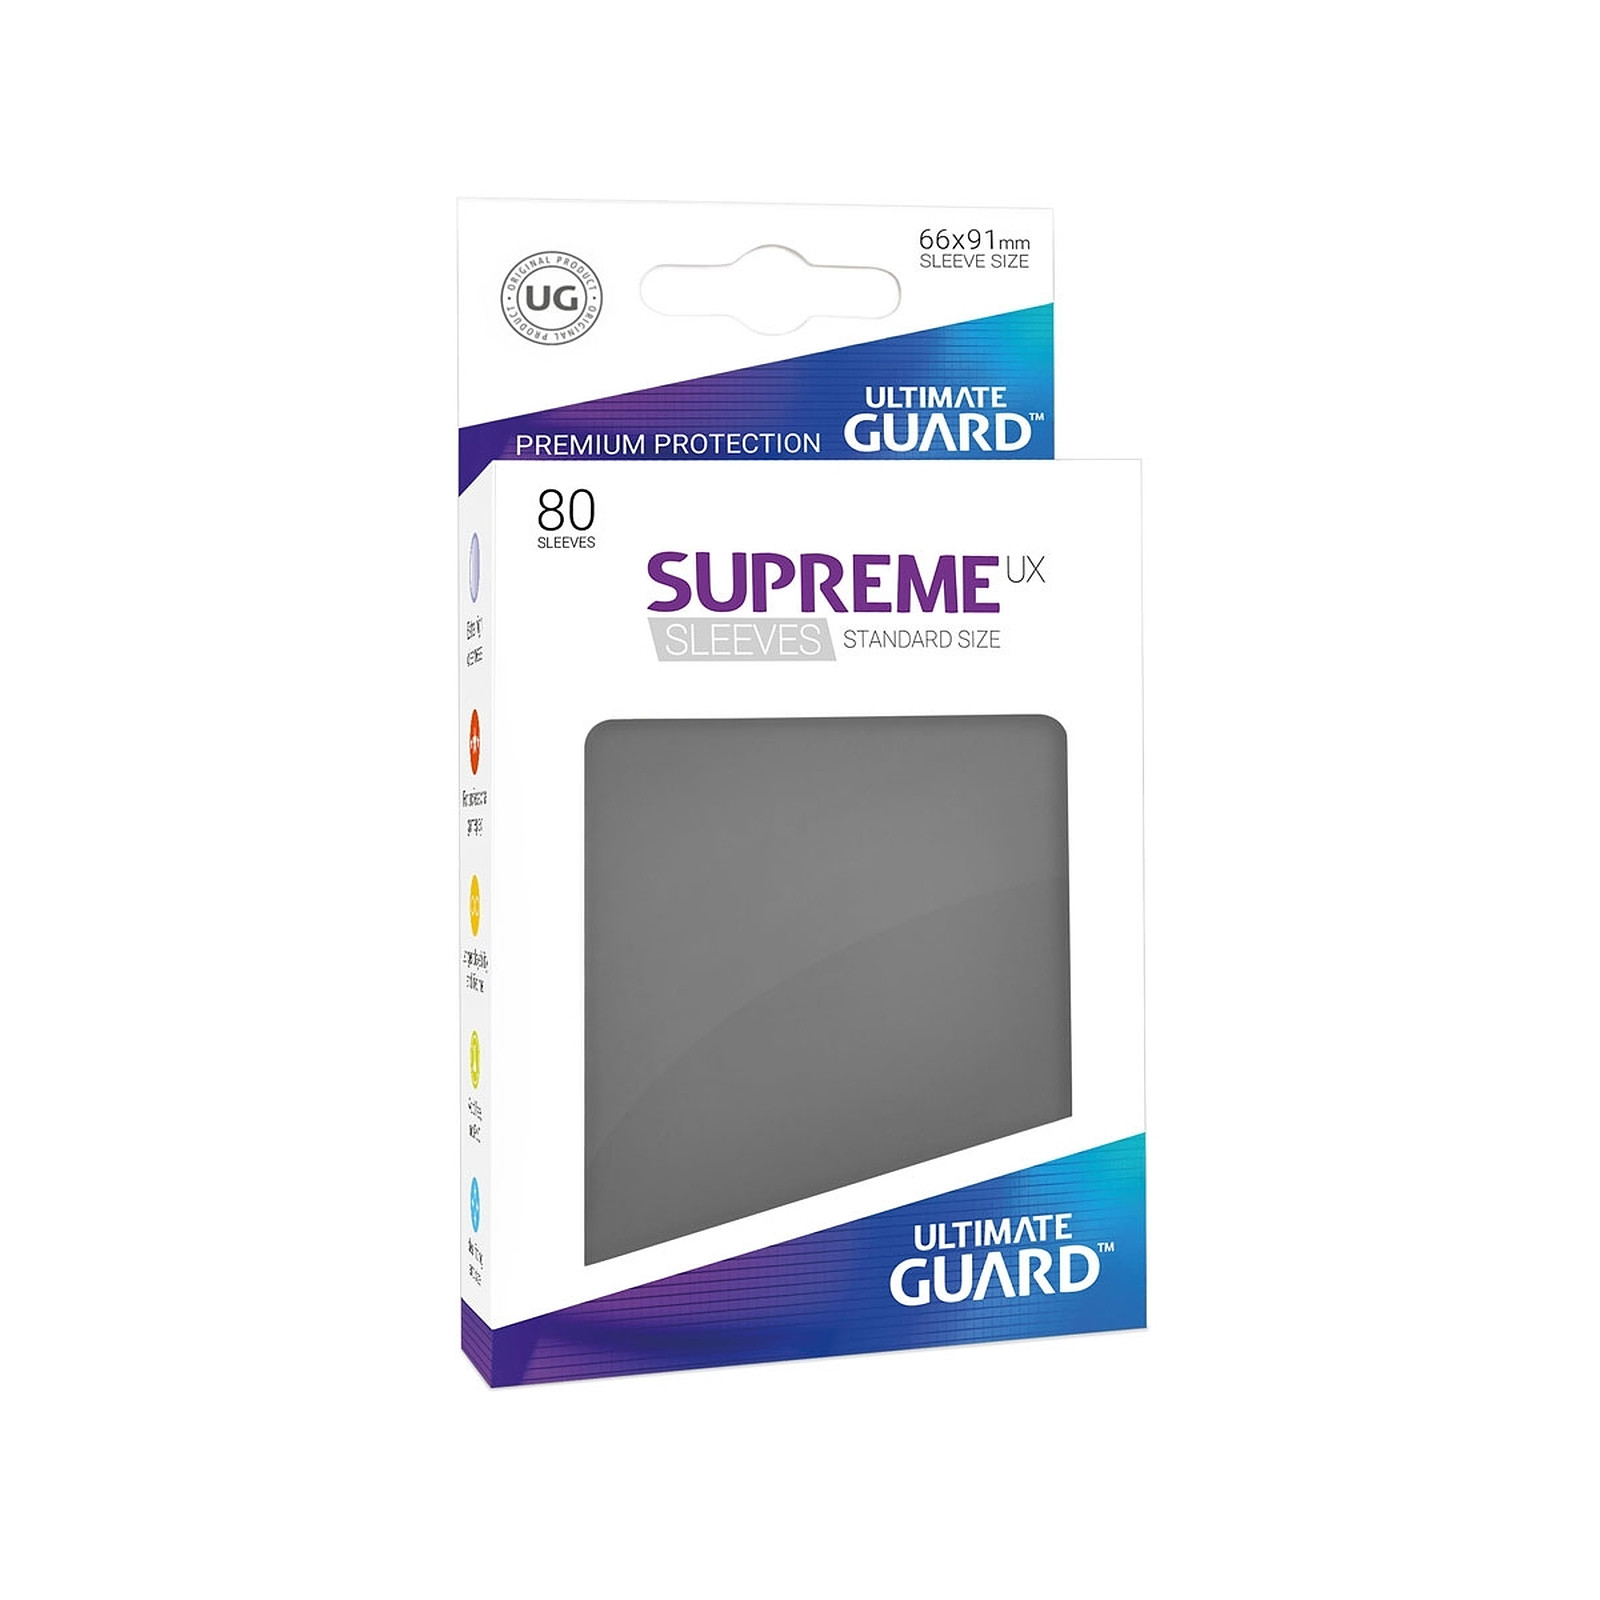 Ultimate Guard - 80 pochettes Supreme UX Sleeves taille standard Gris Fonca© - Accessoire jeux Ultimate Guard